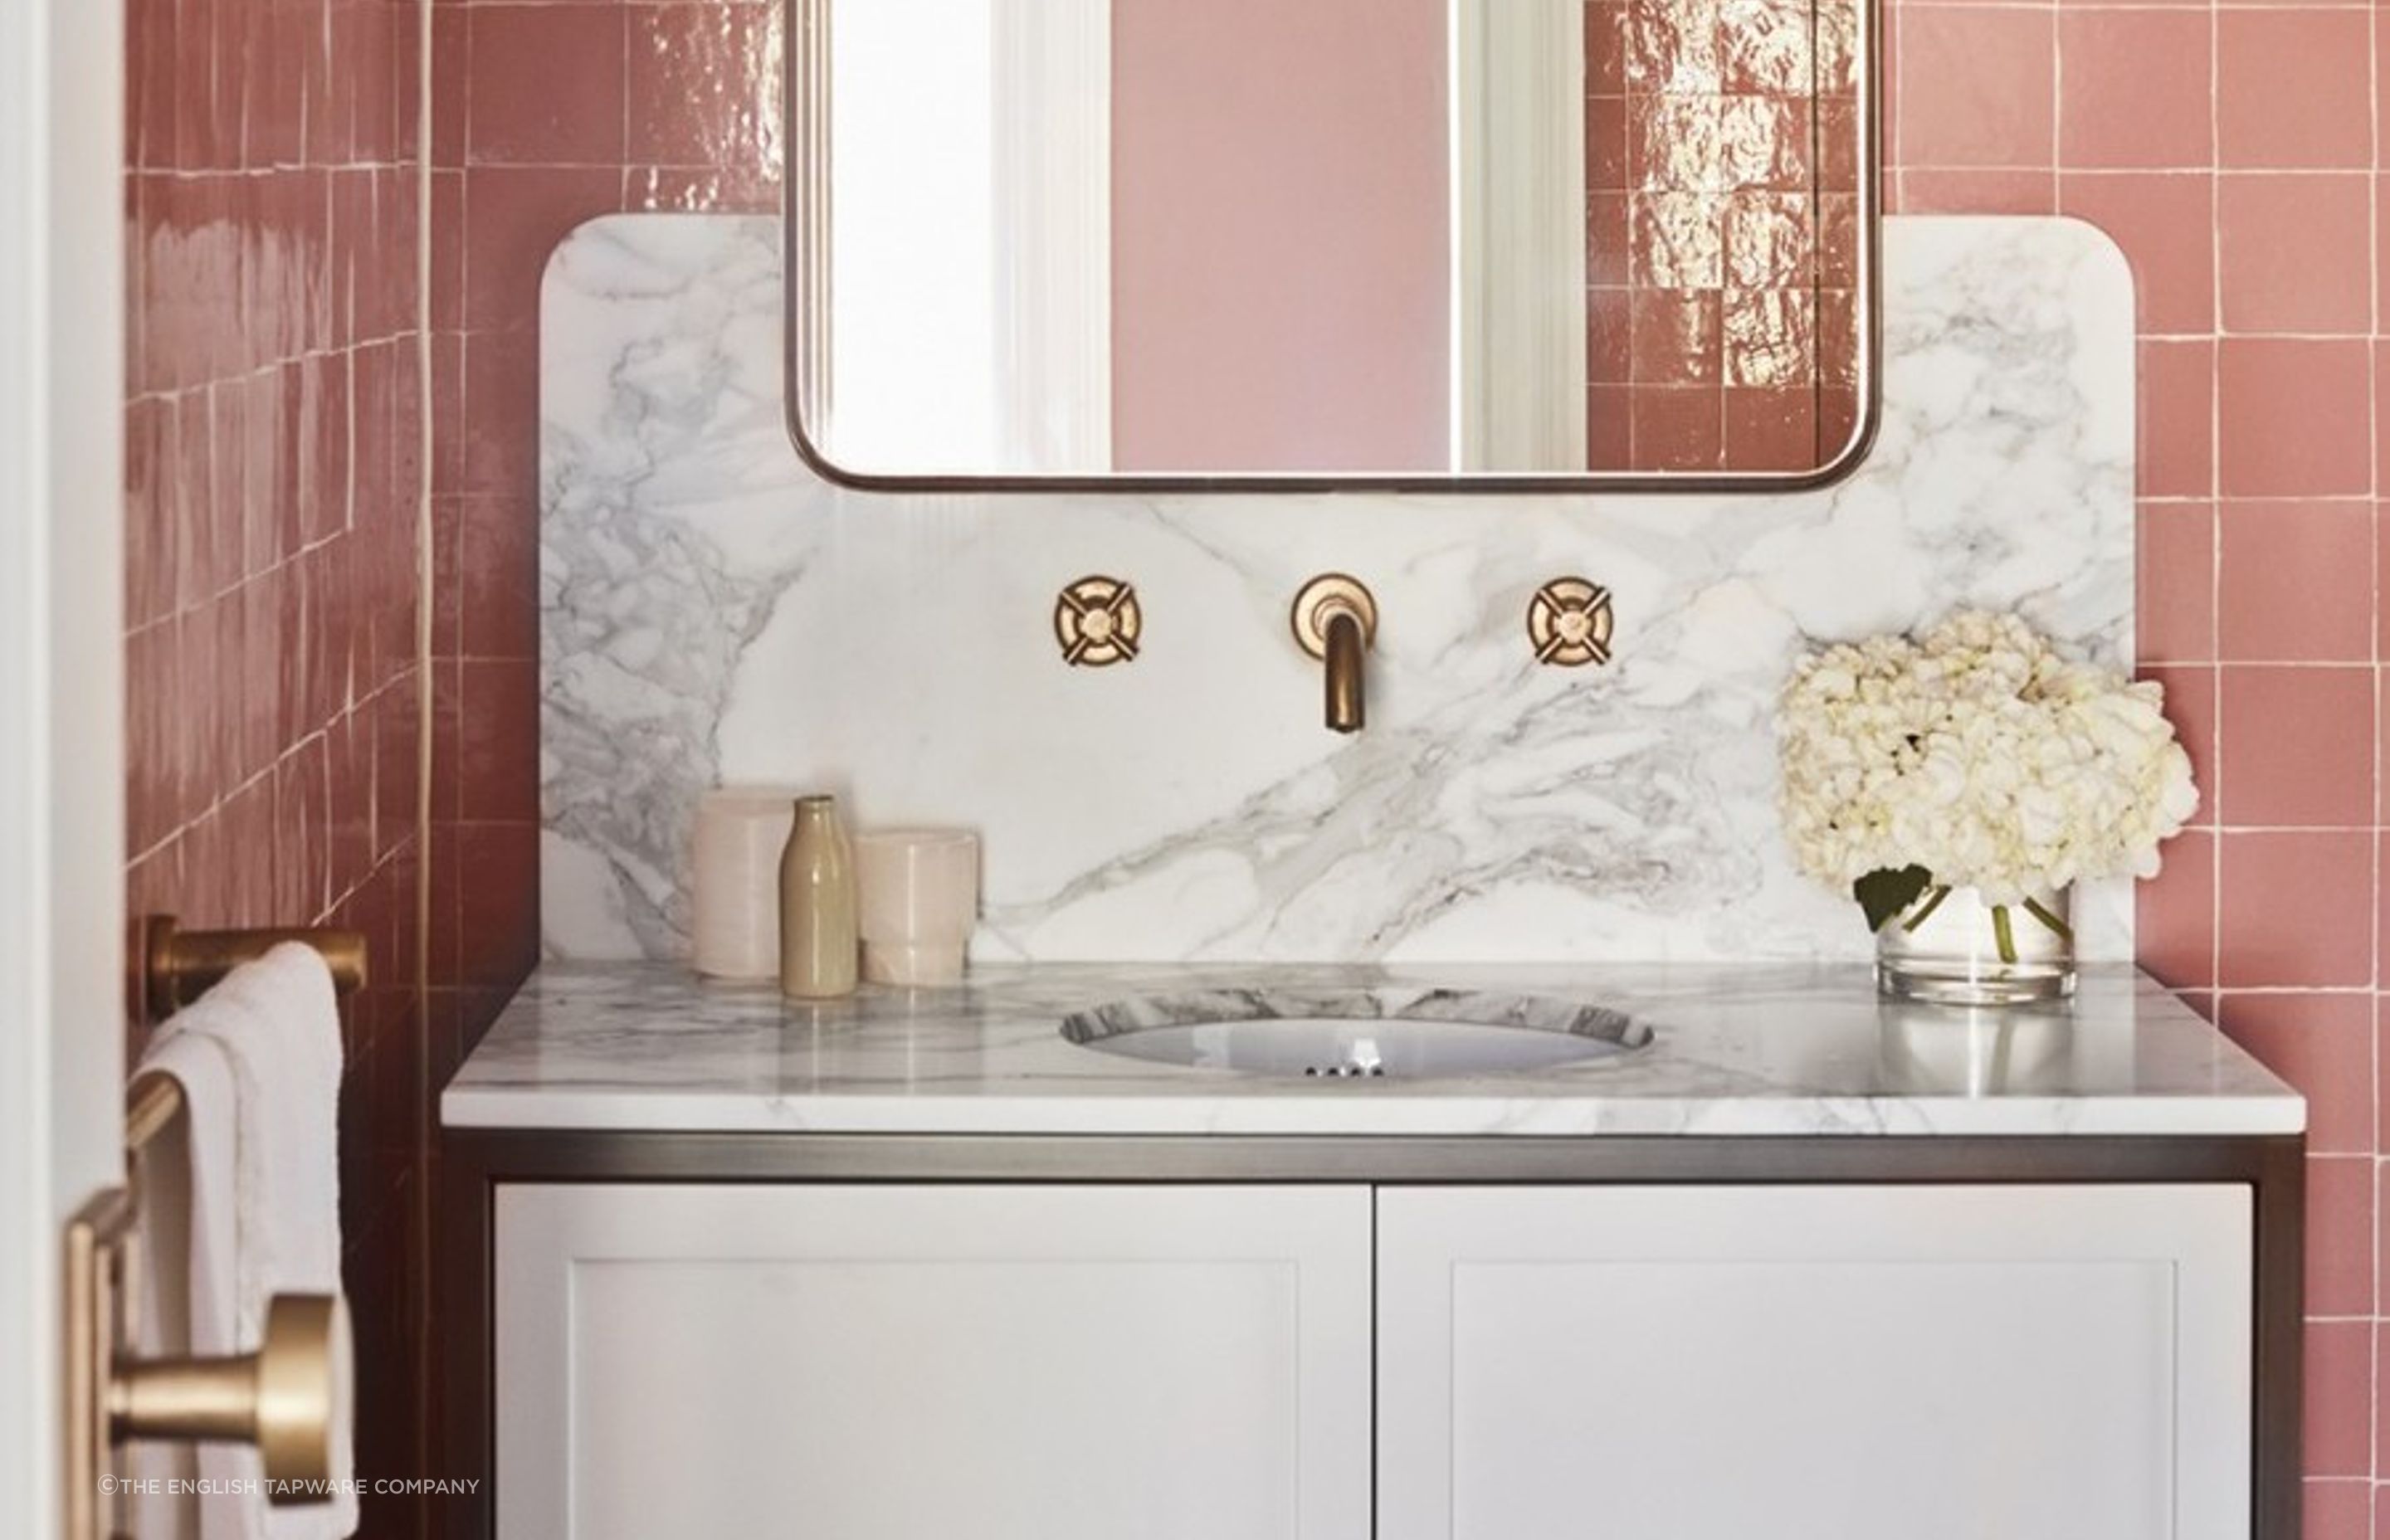 Lindfield Residence Bathroom with hues of coral - Photographer: Prue Roscoe